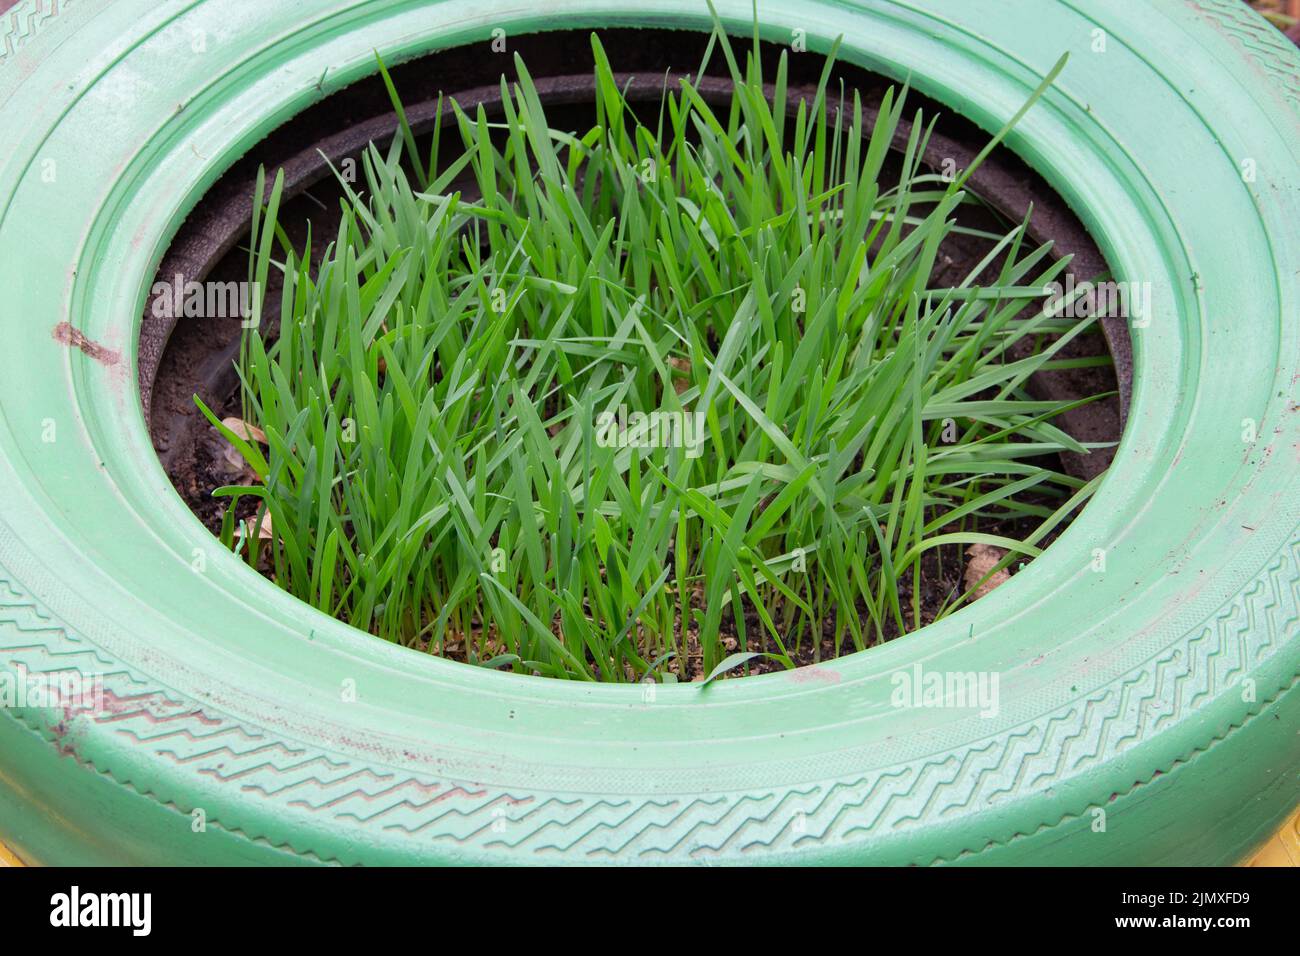 Organic oat plants planted in recycled tires Stock Photo